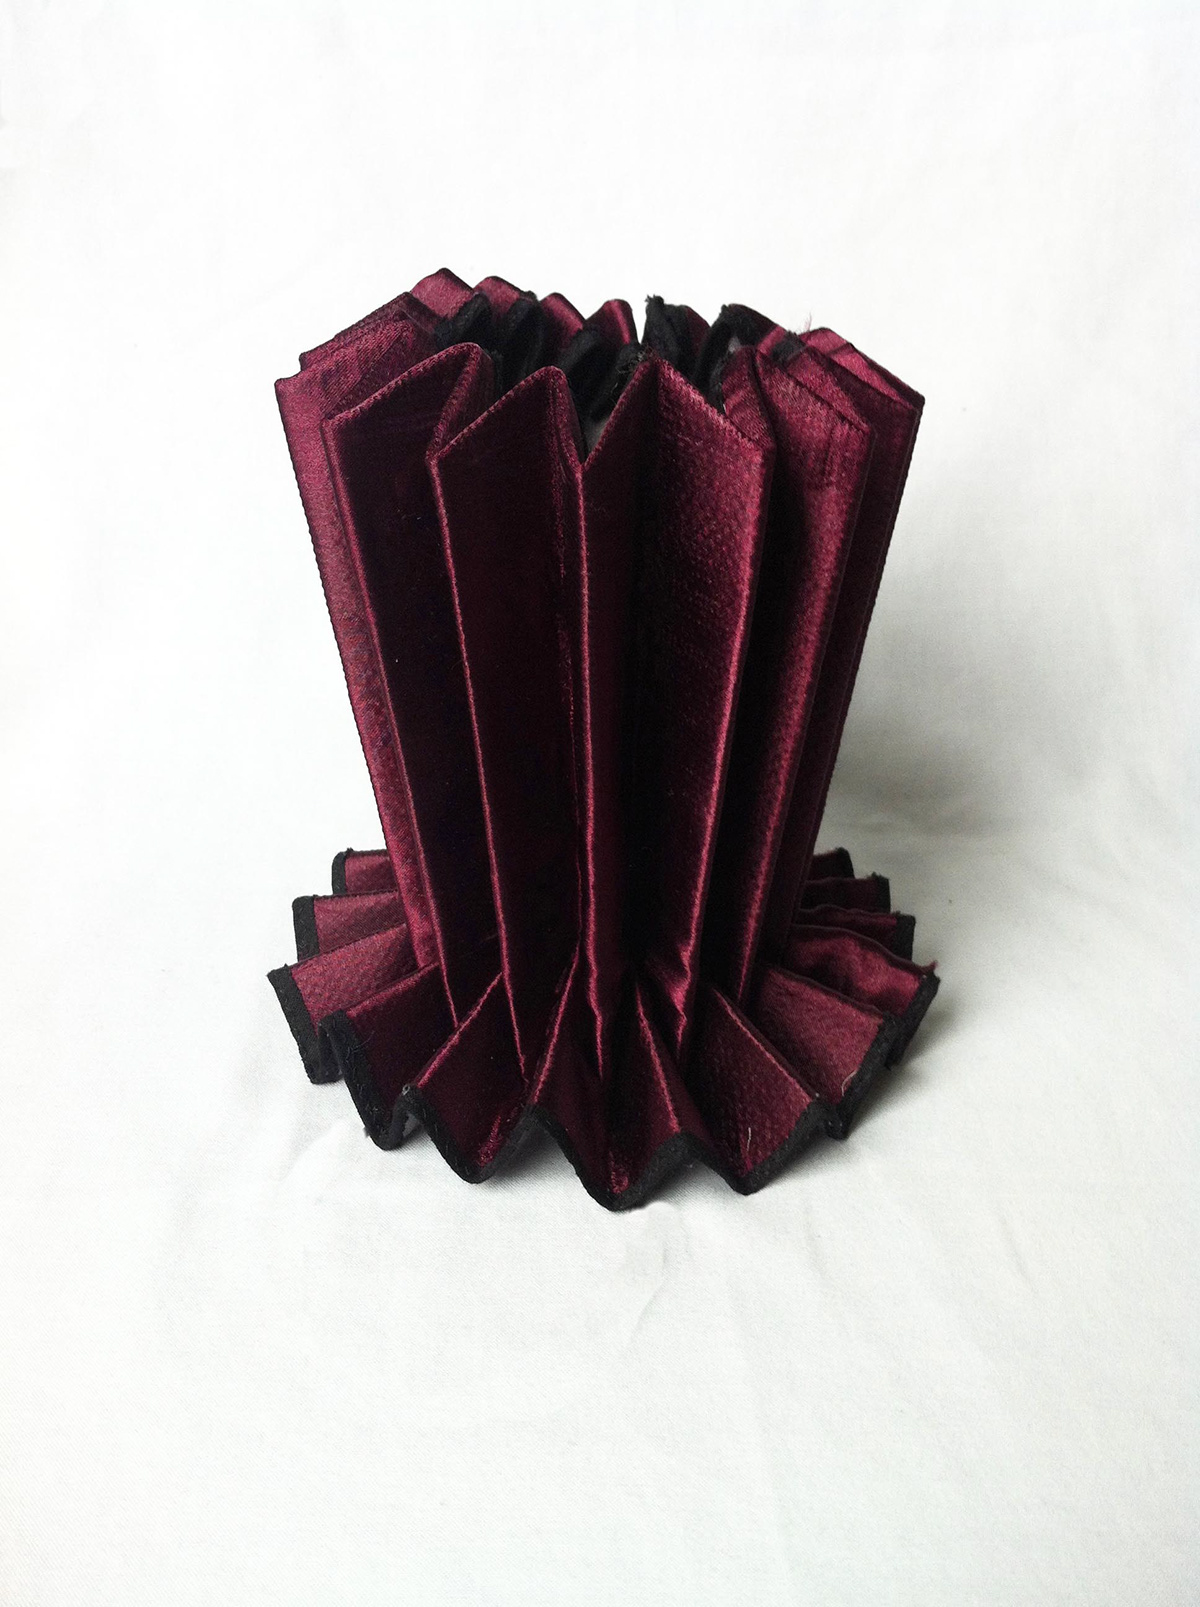 millinery milliner hat Hats top hat Top Hats pattern folding origami  pop up pop ups books pop up book hat box accessories